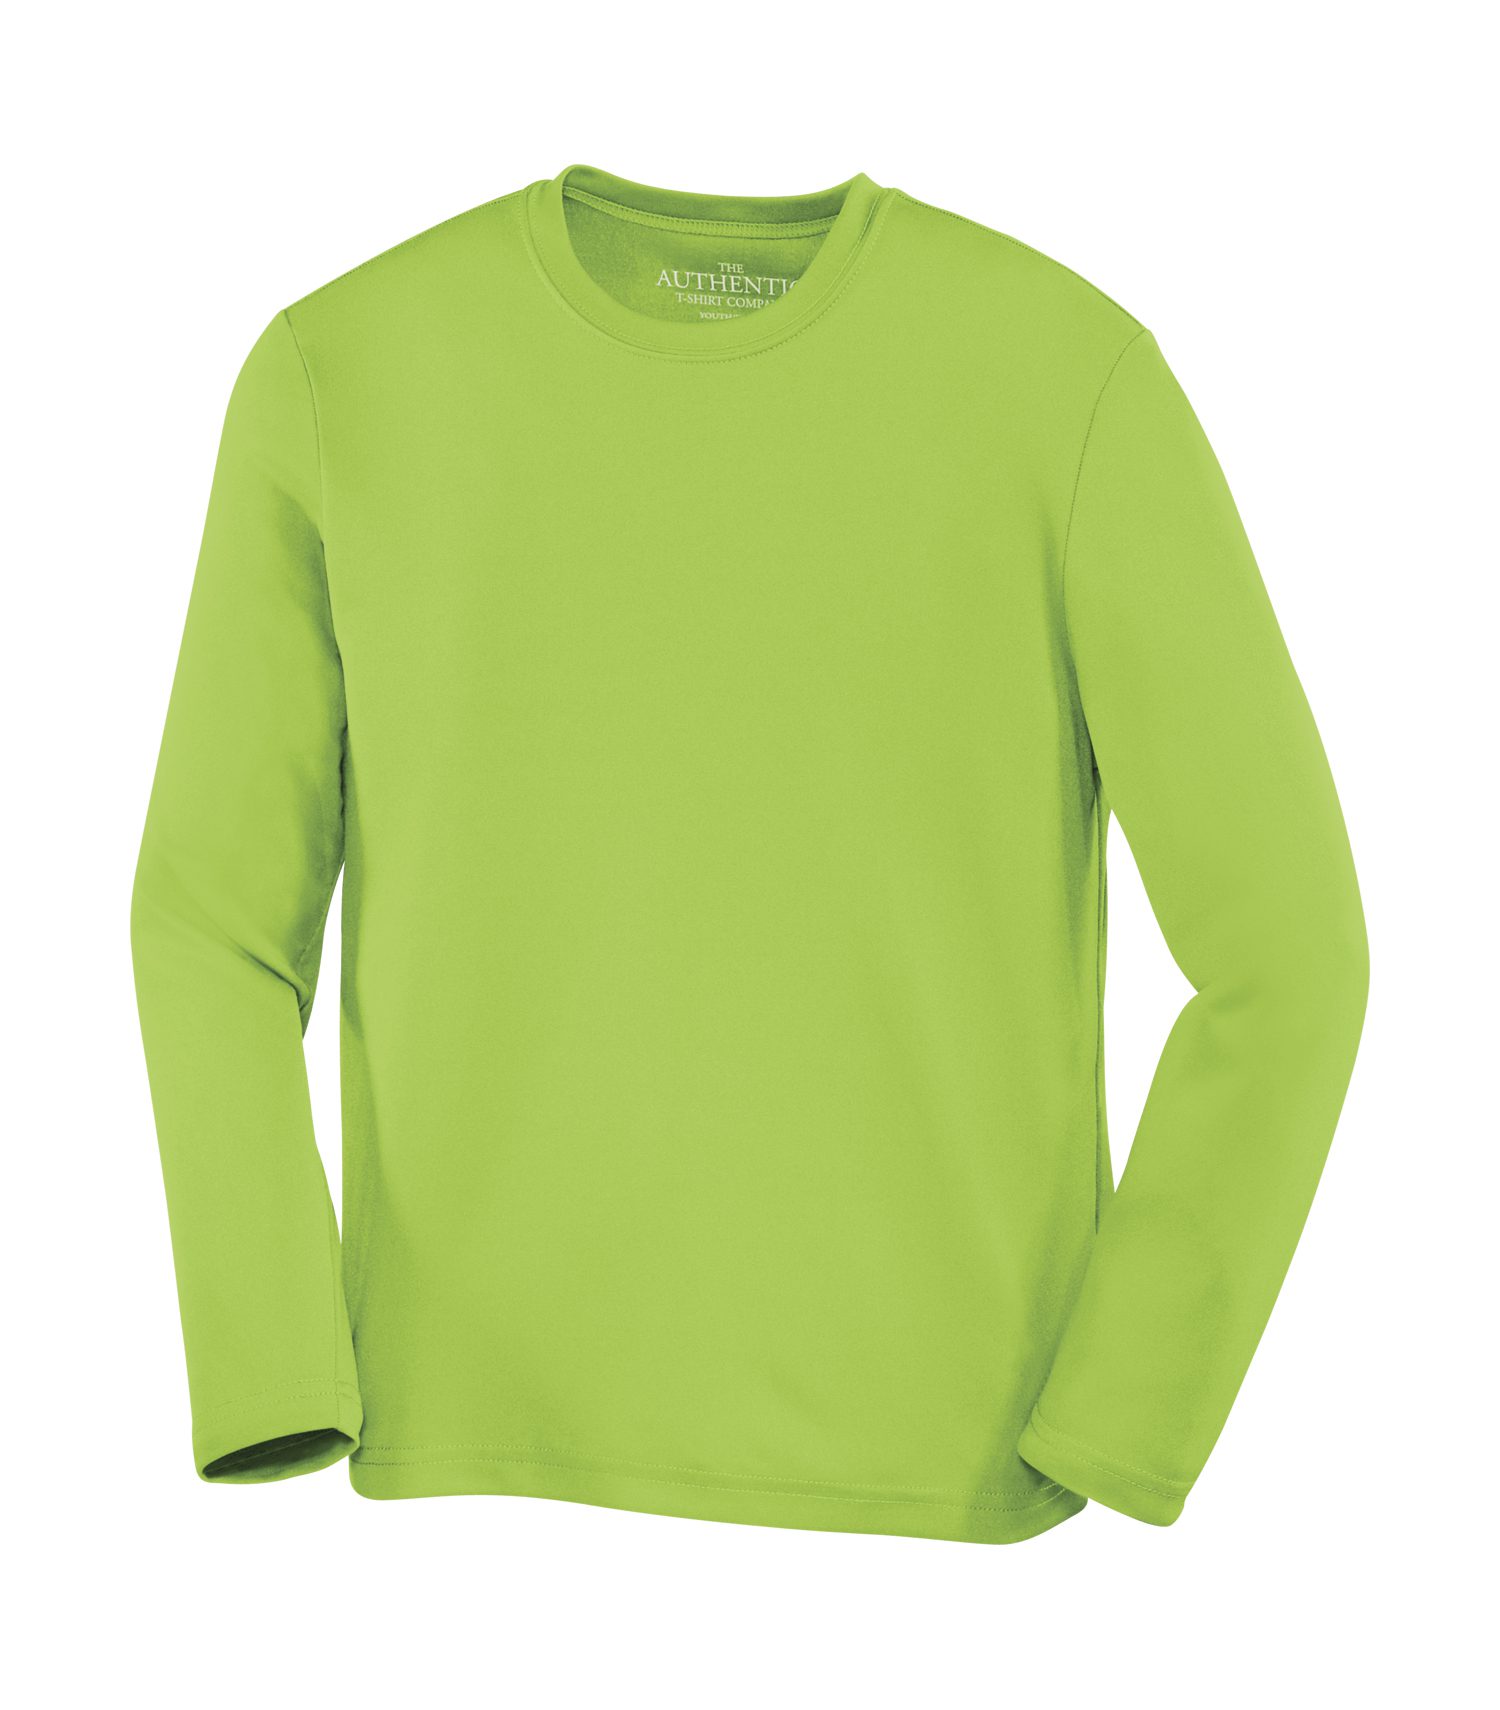 ATC™ PRO TEAM LONG SLEEVE YOUTH TEE #Y350LS Lime Shock